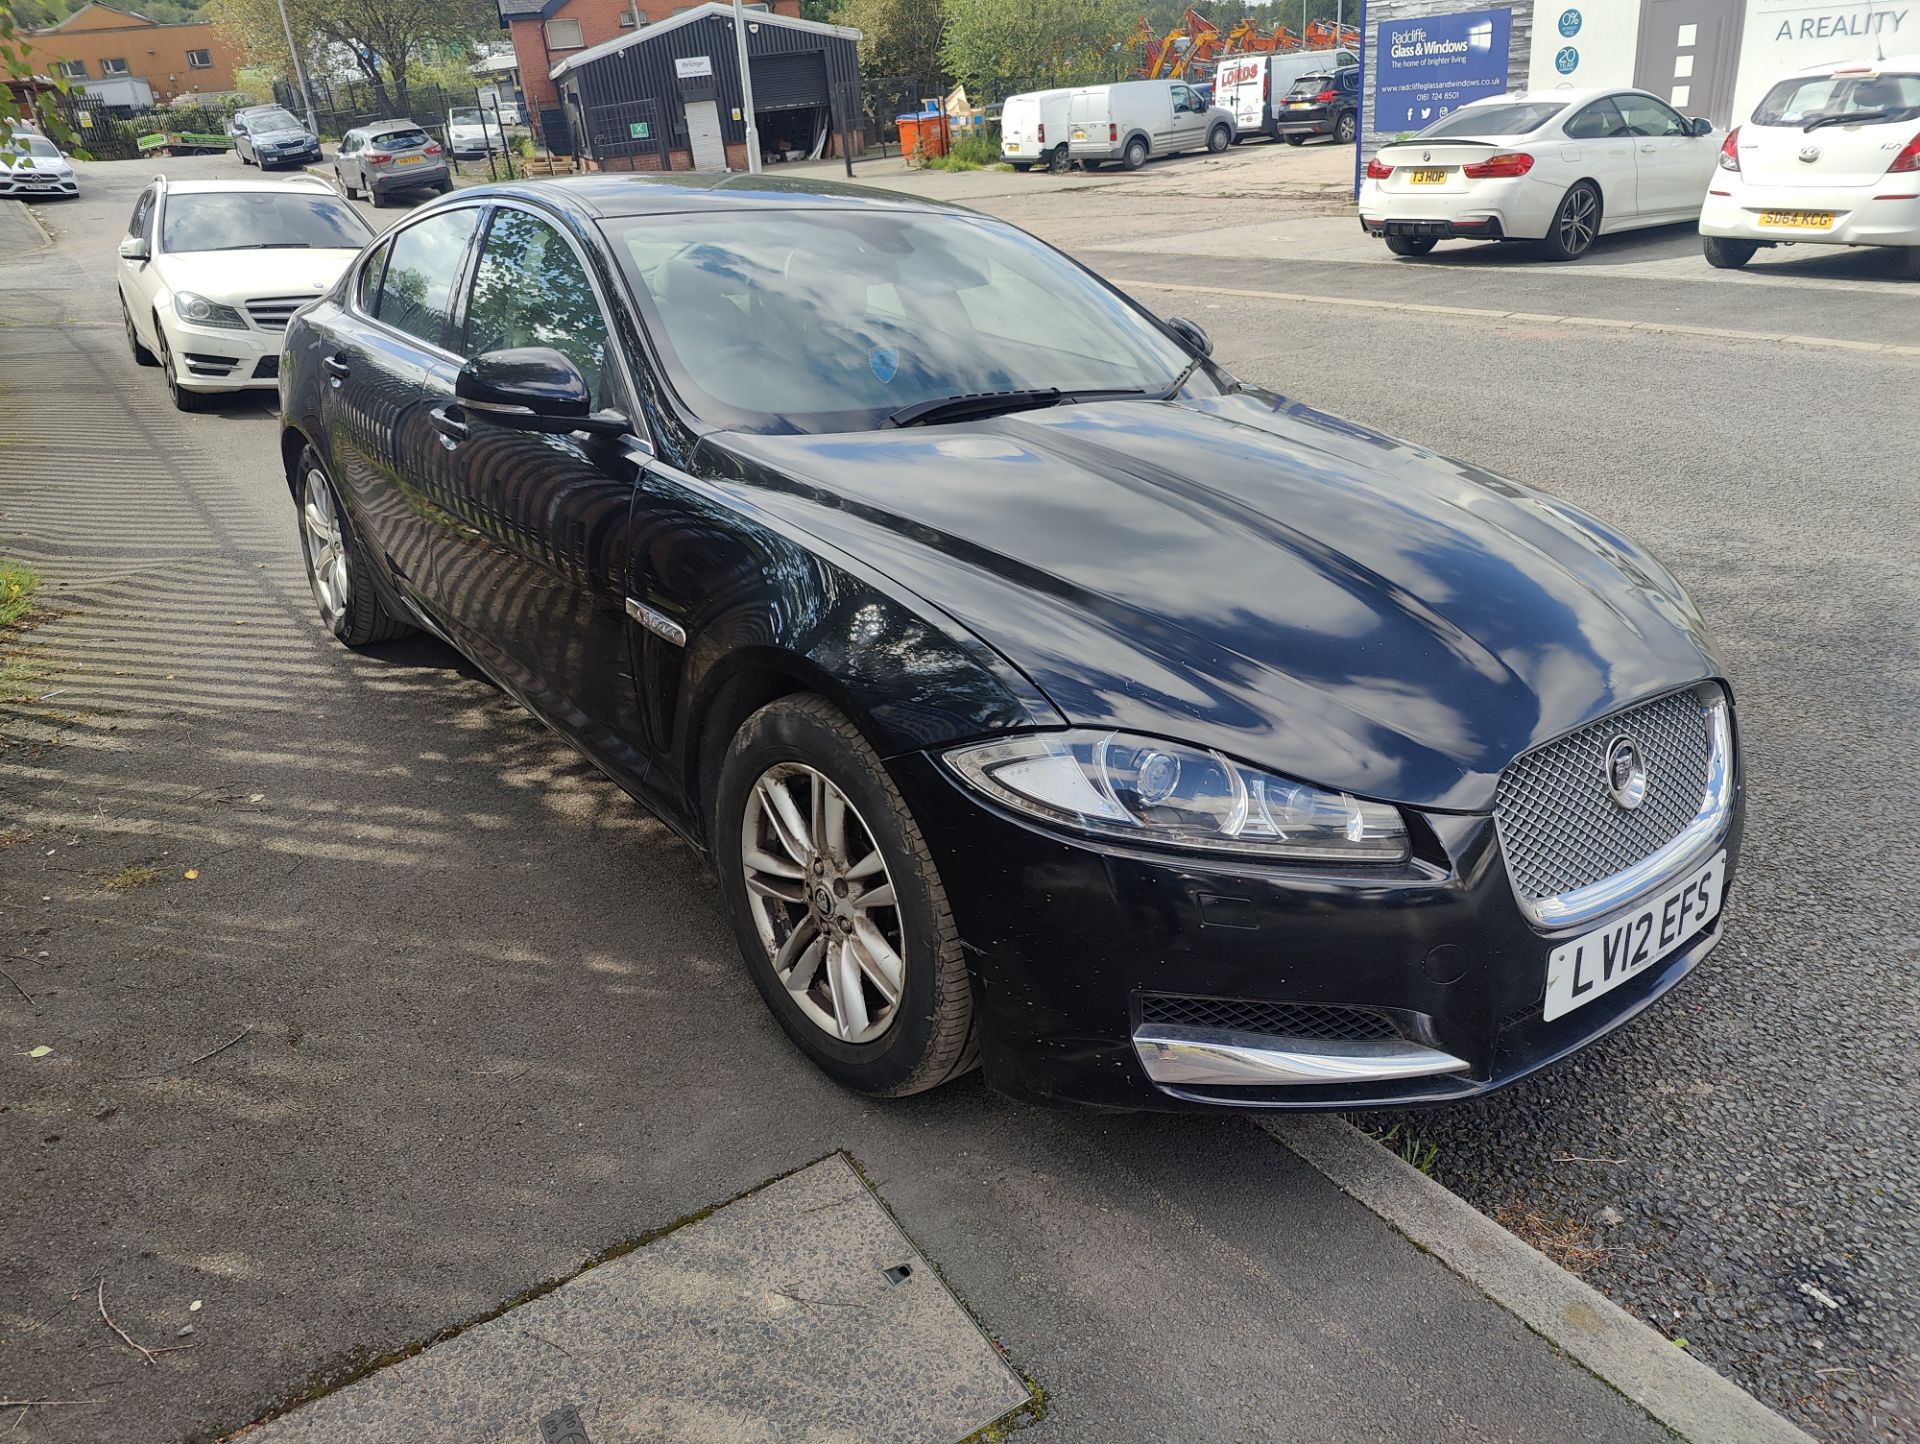 JAGUAR XF DIESEL SALOON 2.2D LUXURY 4DR AUTO 12 MONTHS MOT (NO VAT ON HAMMER) - IN DAILY USE - Image 19 of 19